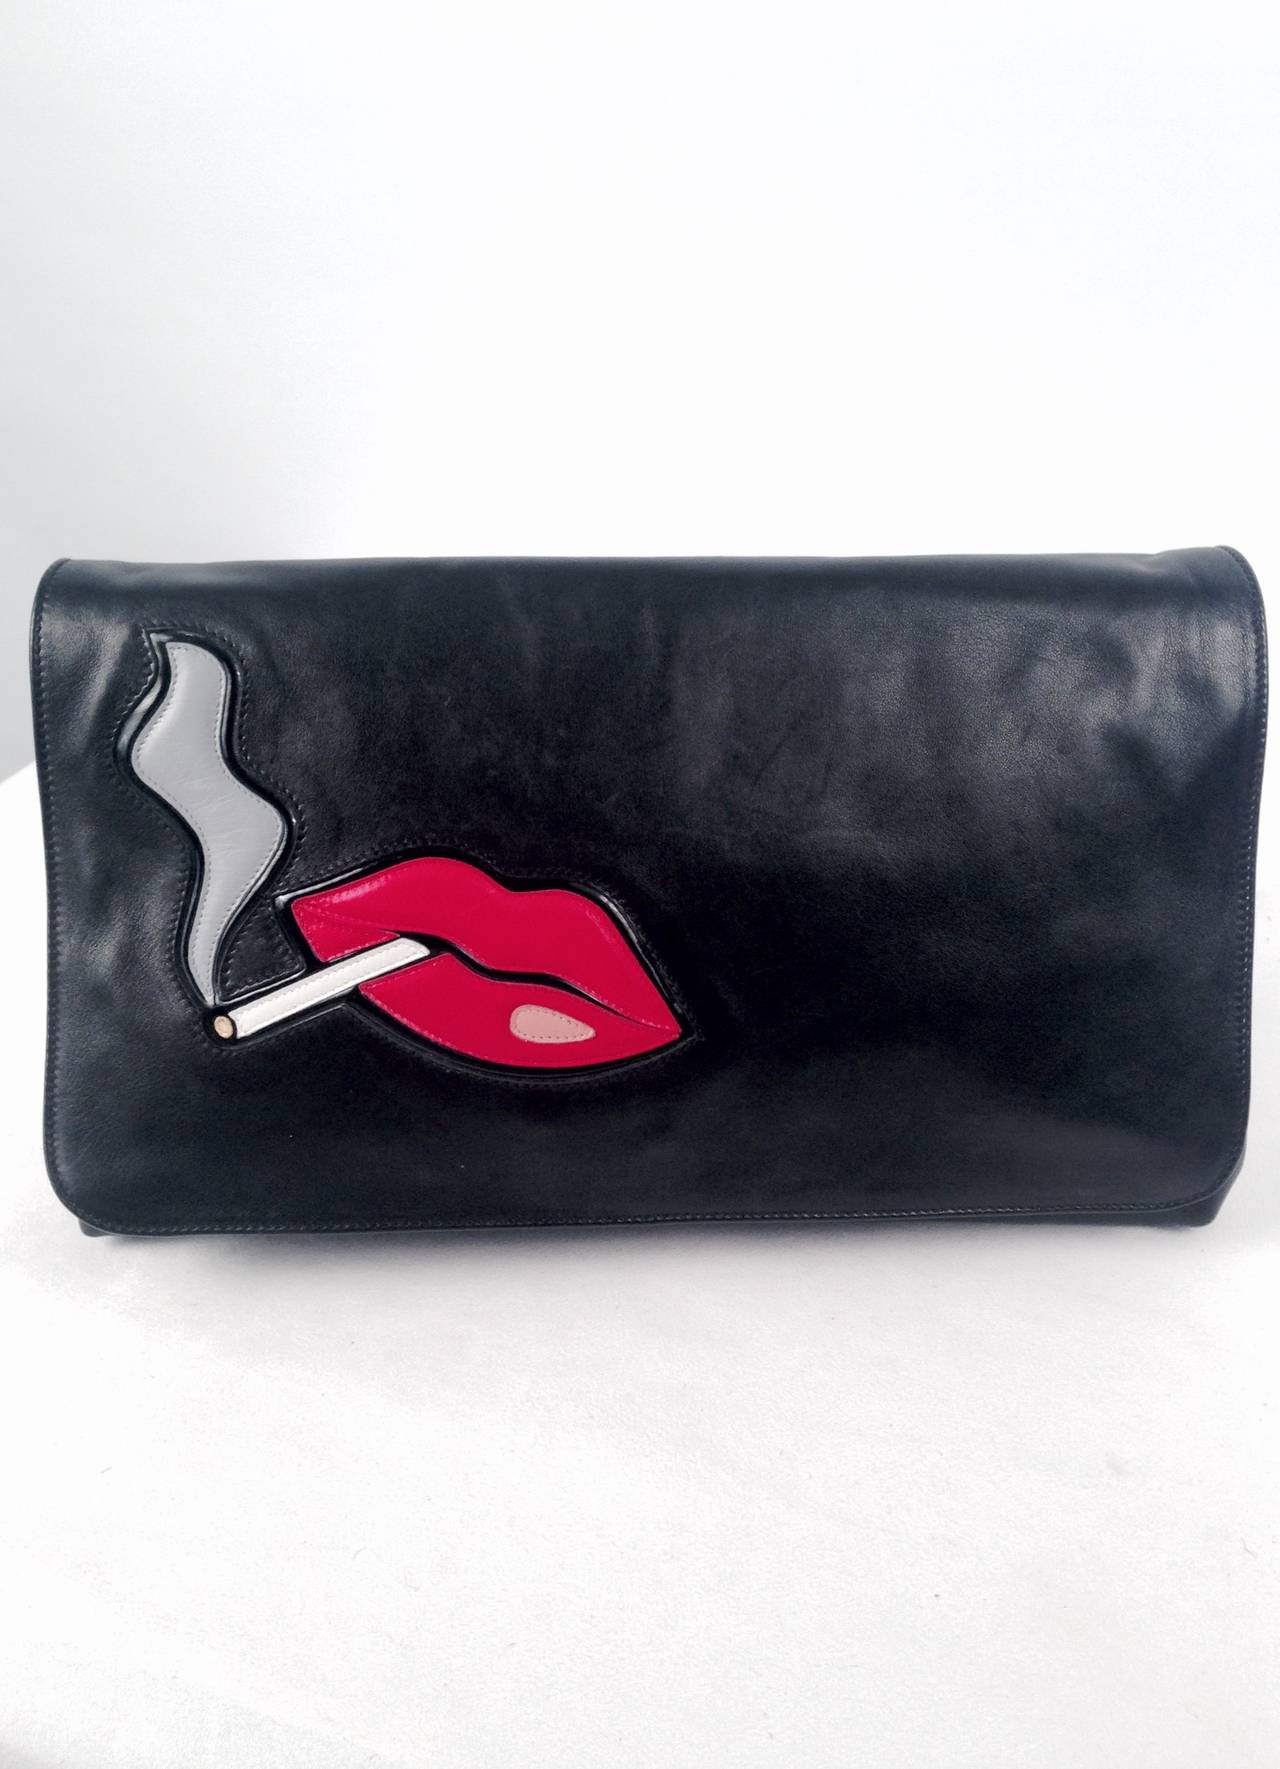 Prada Nappa Leather Smoking Lips Clutch In Excellent Condition For Sale In Palm Beach, FL